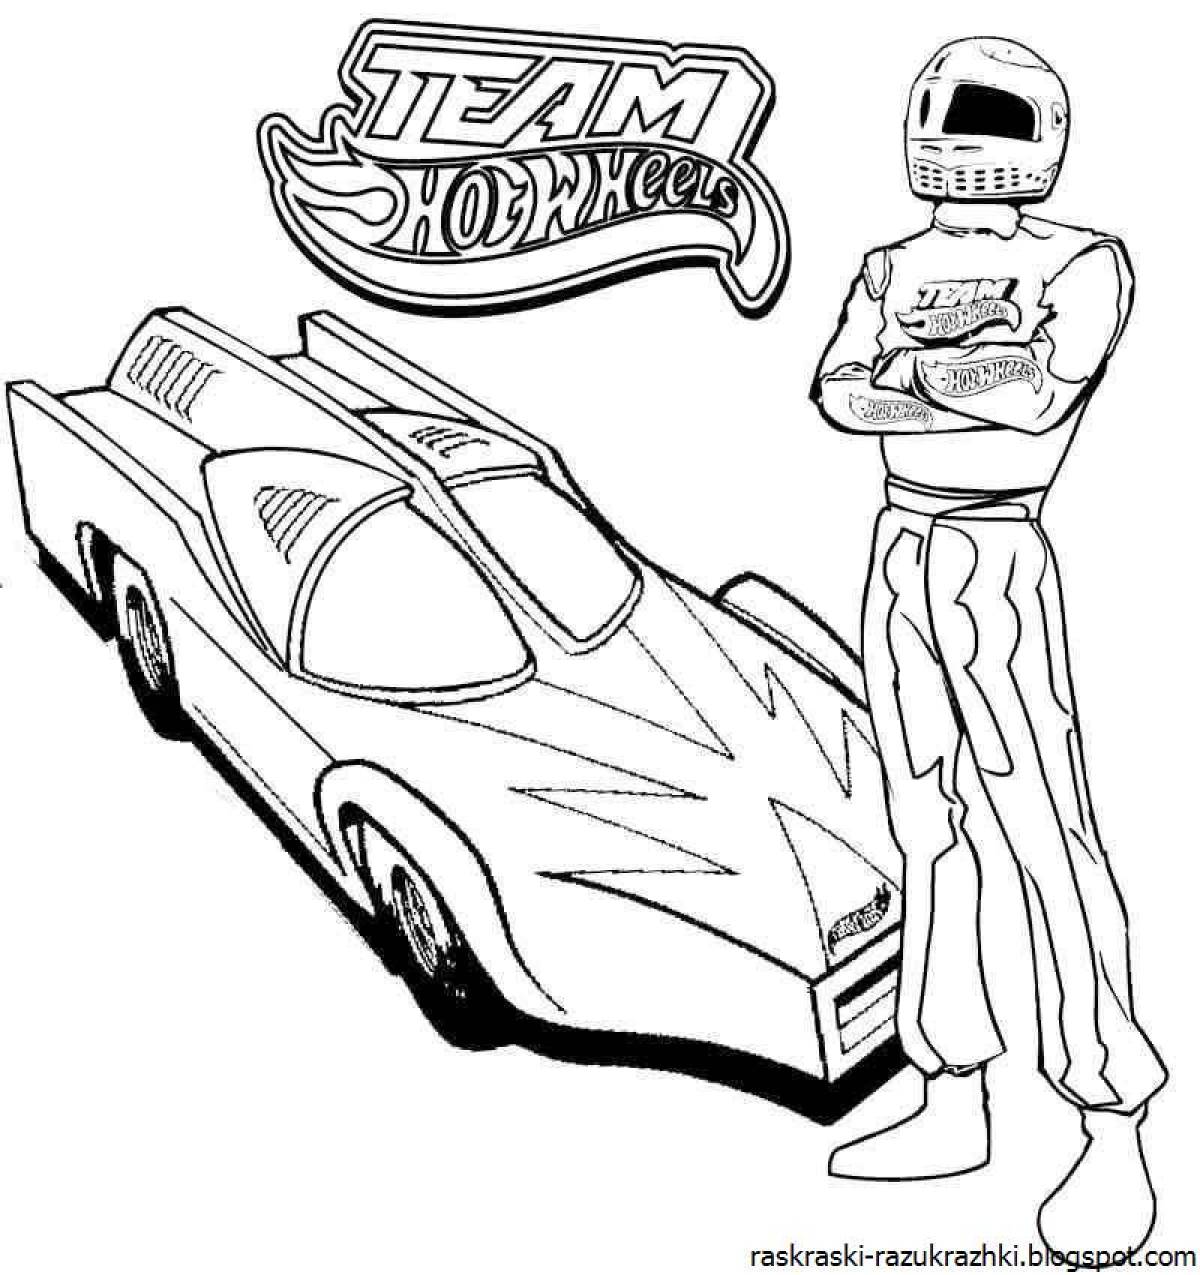 Dazzling hot wheels coloring pages for kids